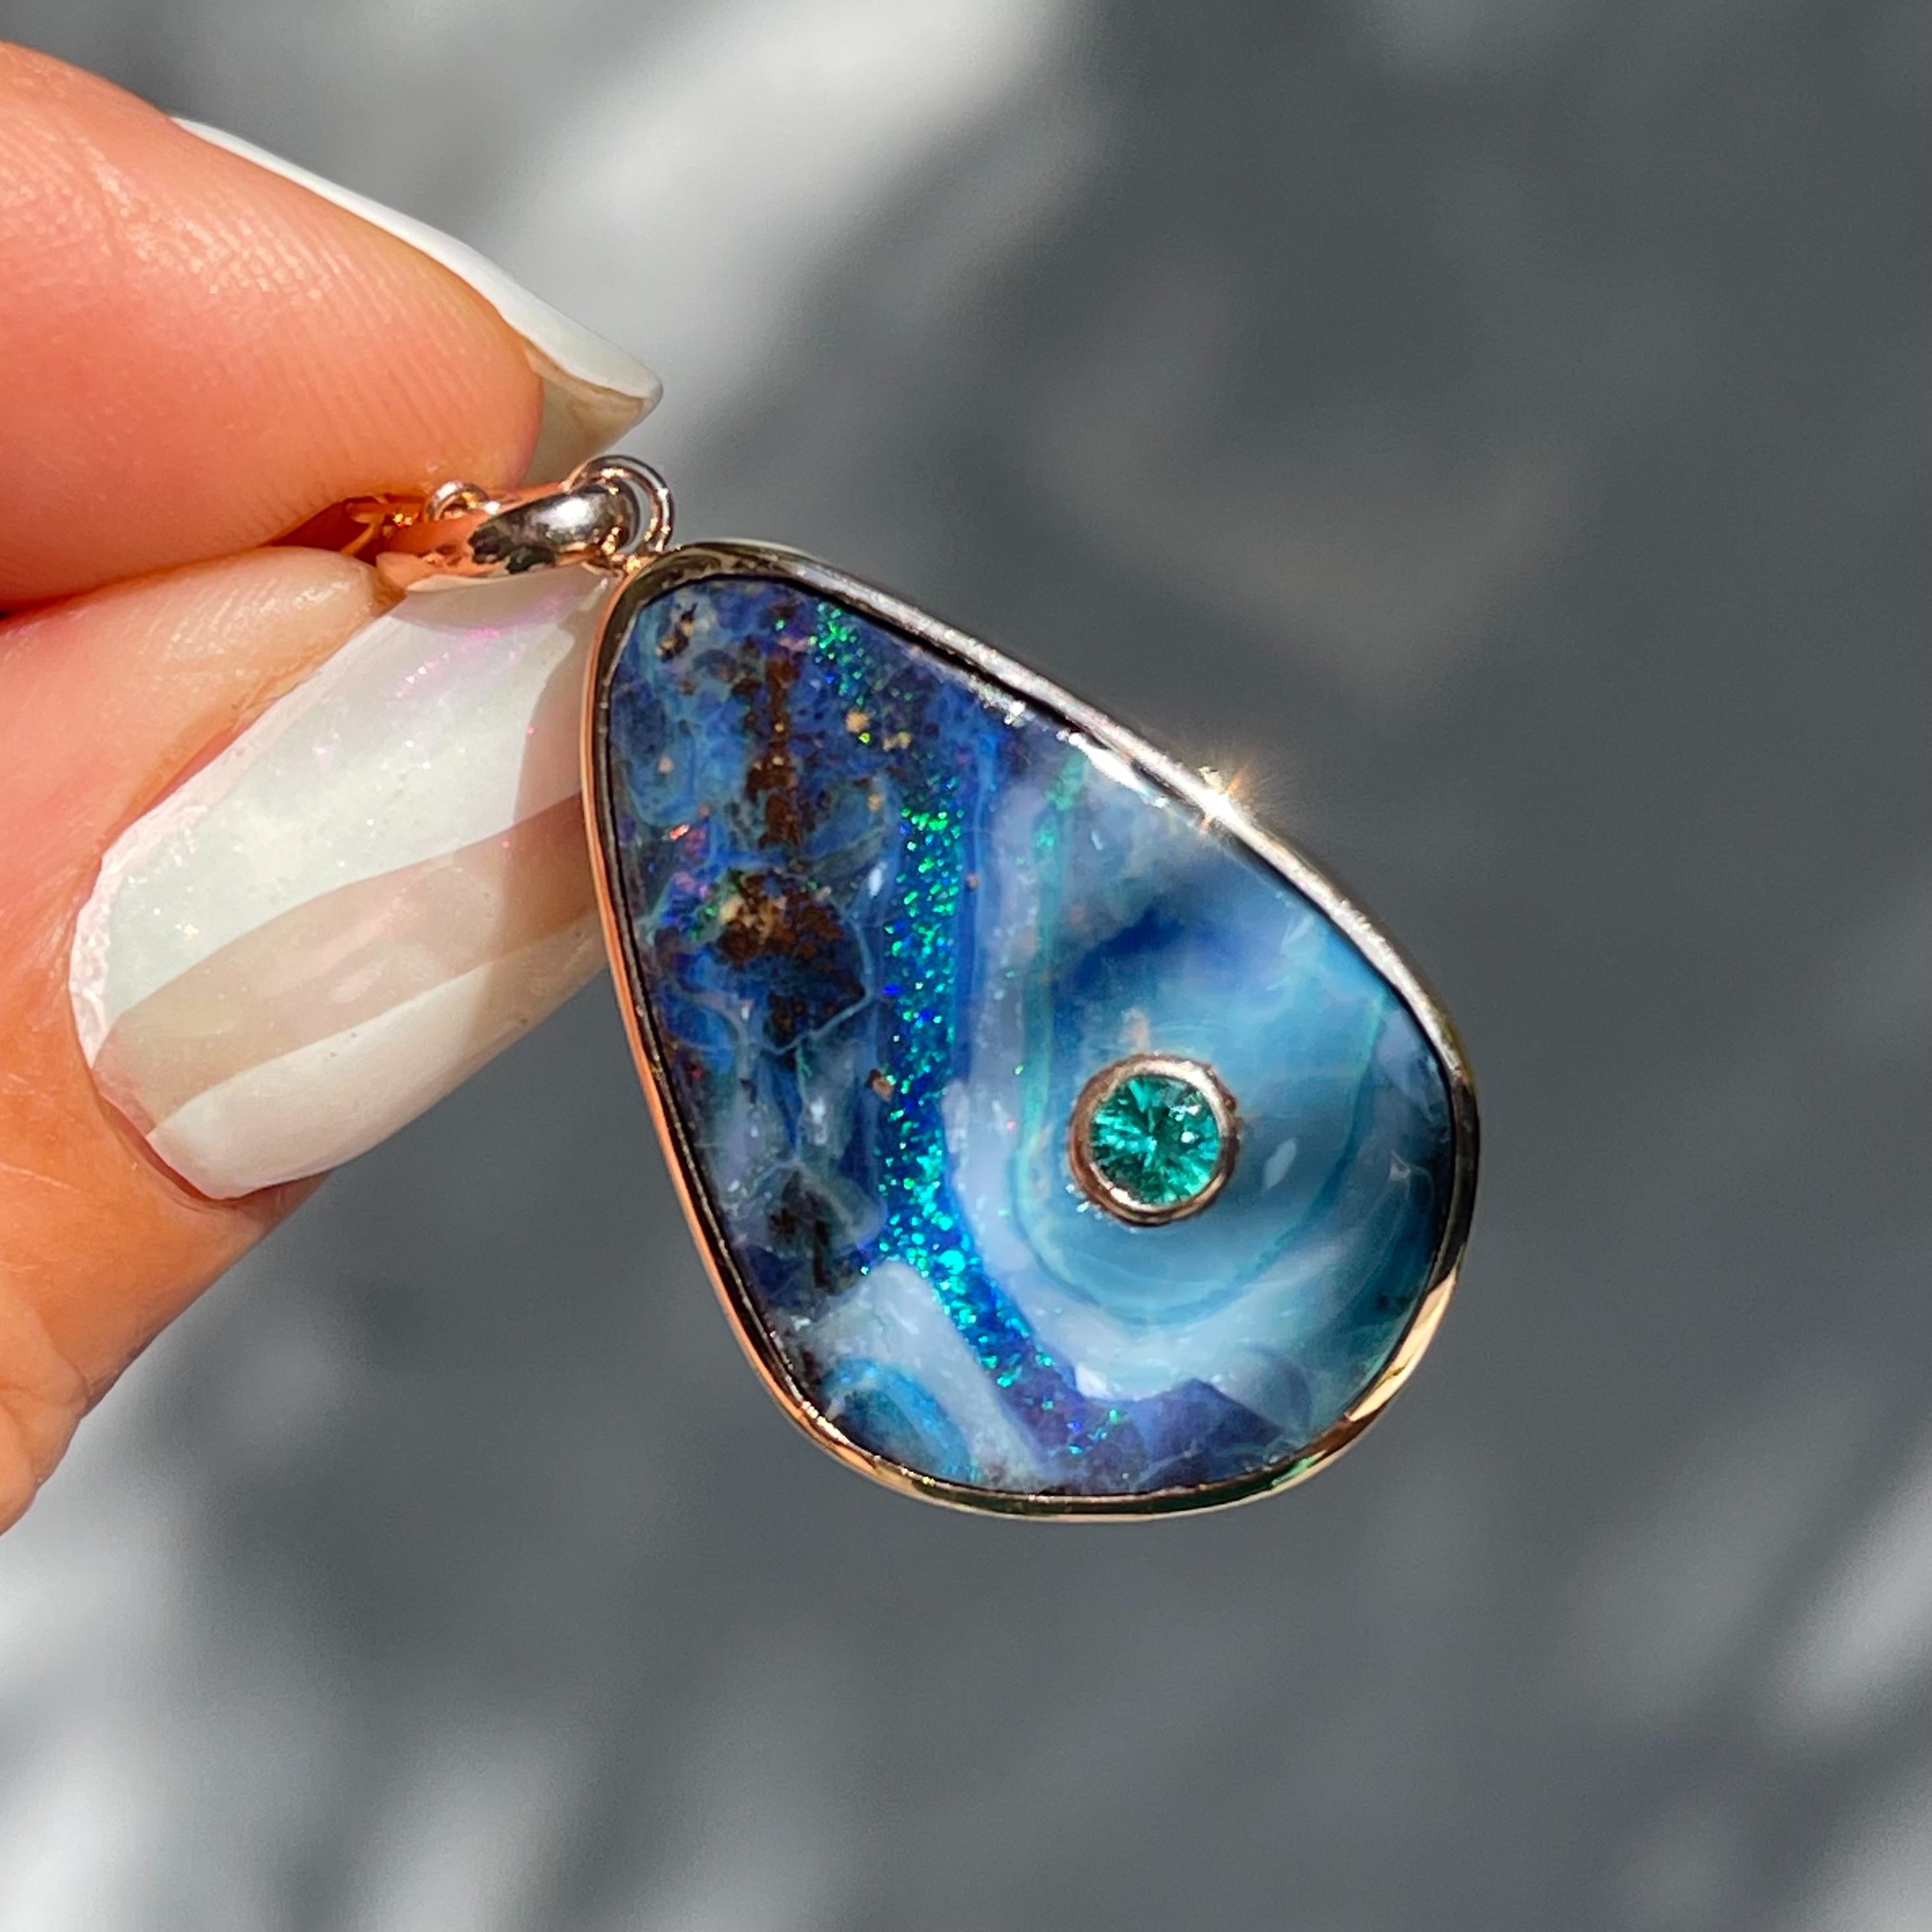 Inside this Australian Opal Necklace flows a scintillating river with emerald hues. Embedded in the scenic blue opal is a glistening emerald anchoring the opal pendant. The sinuous river meanders around the verdant gem, pursuing the path of least